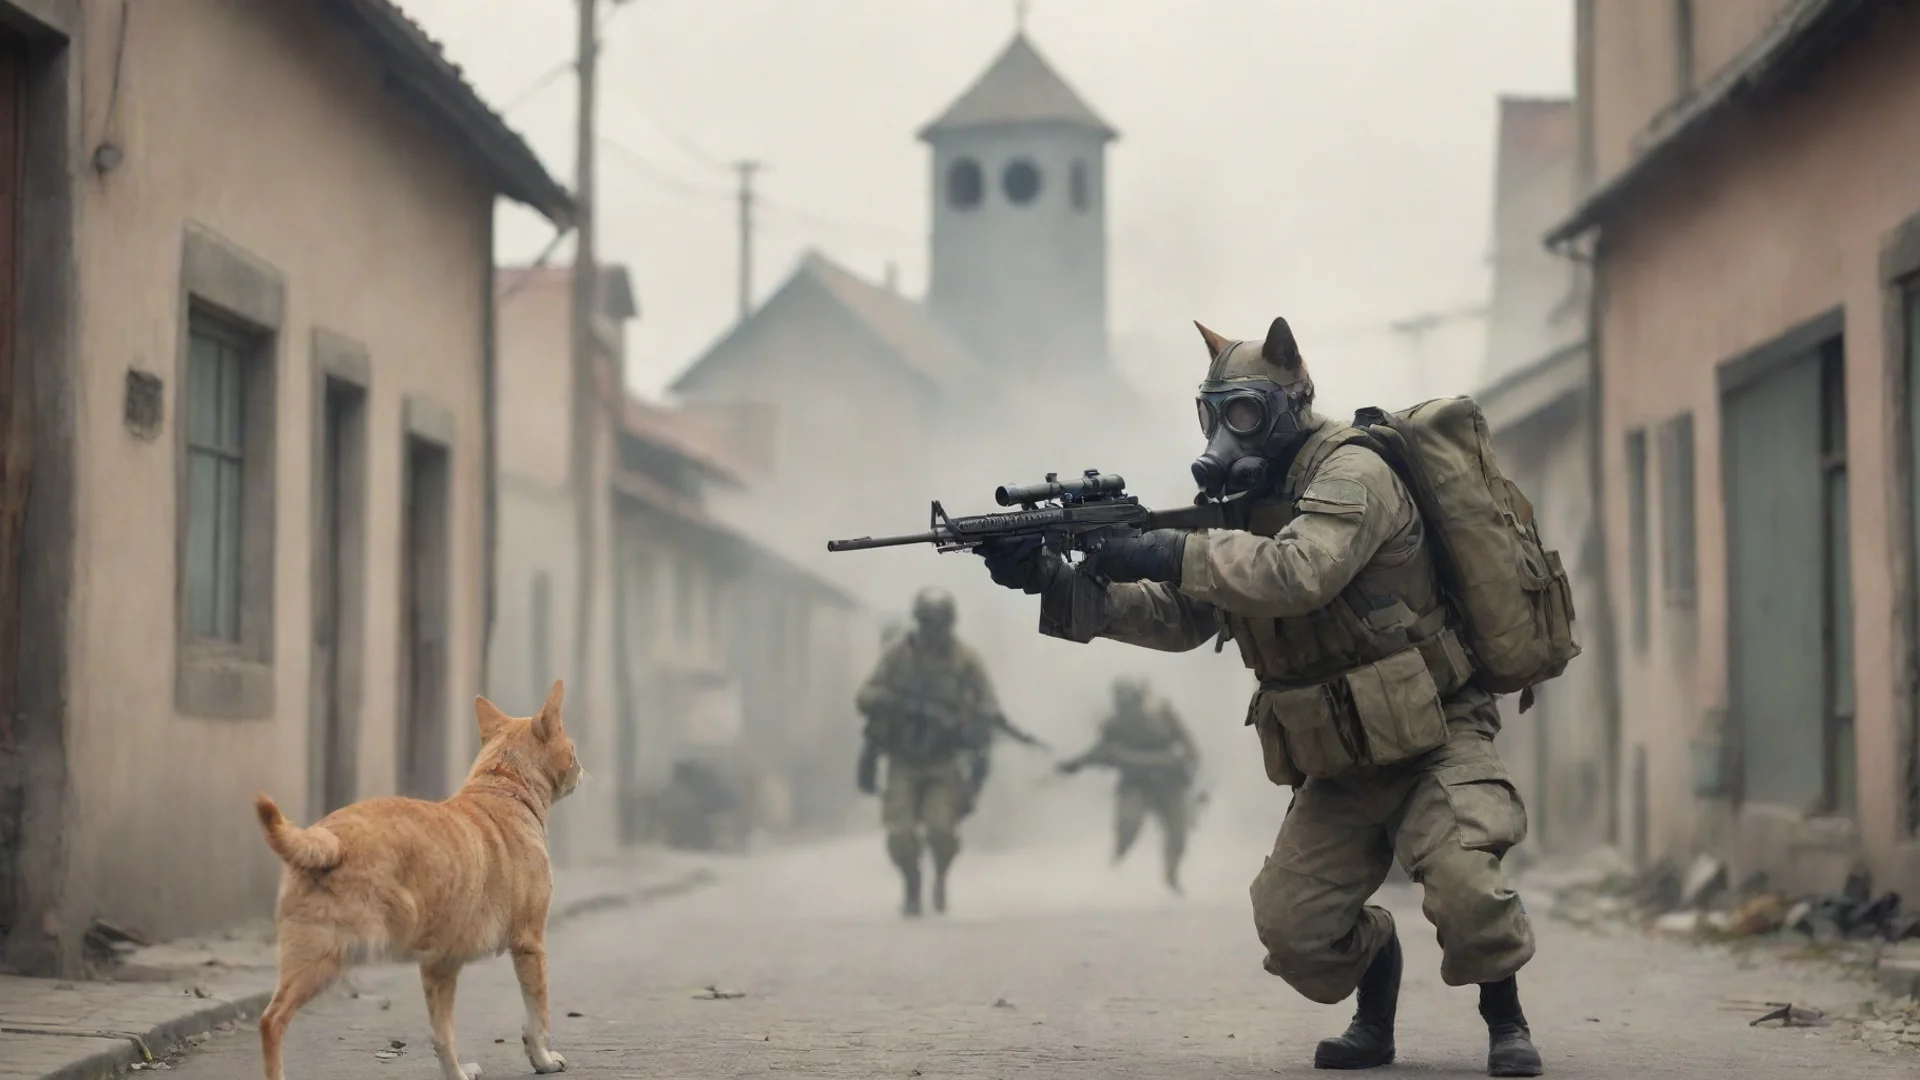 cat soldier with gas mask shooting dog soldier in a small town wide